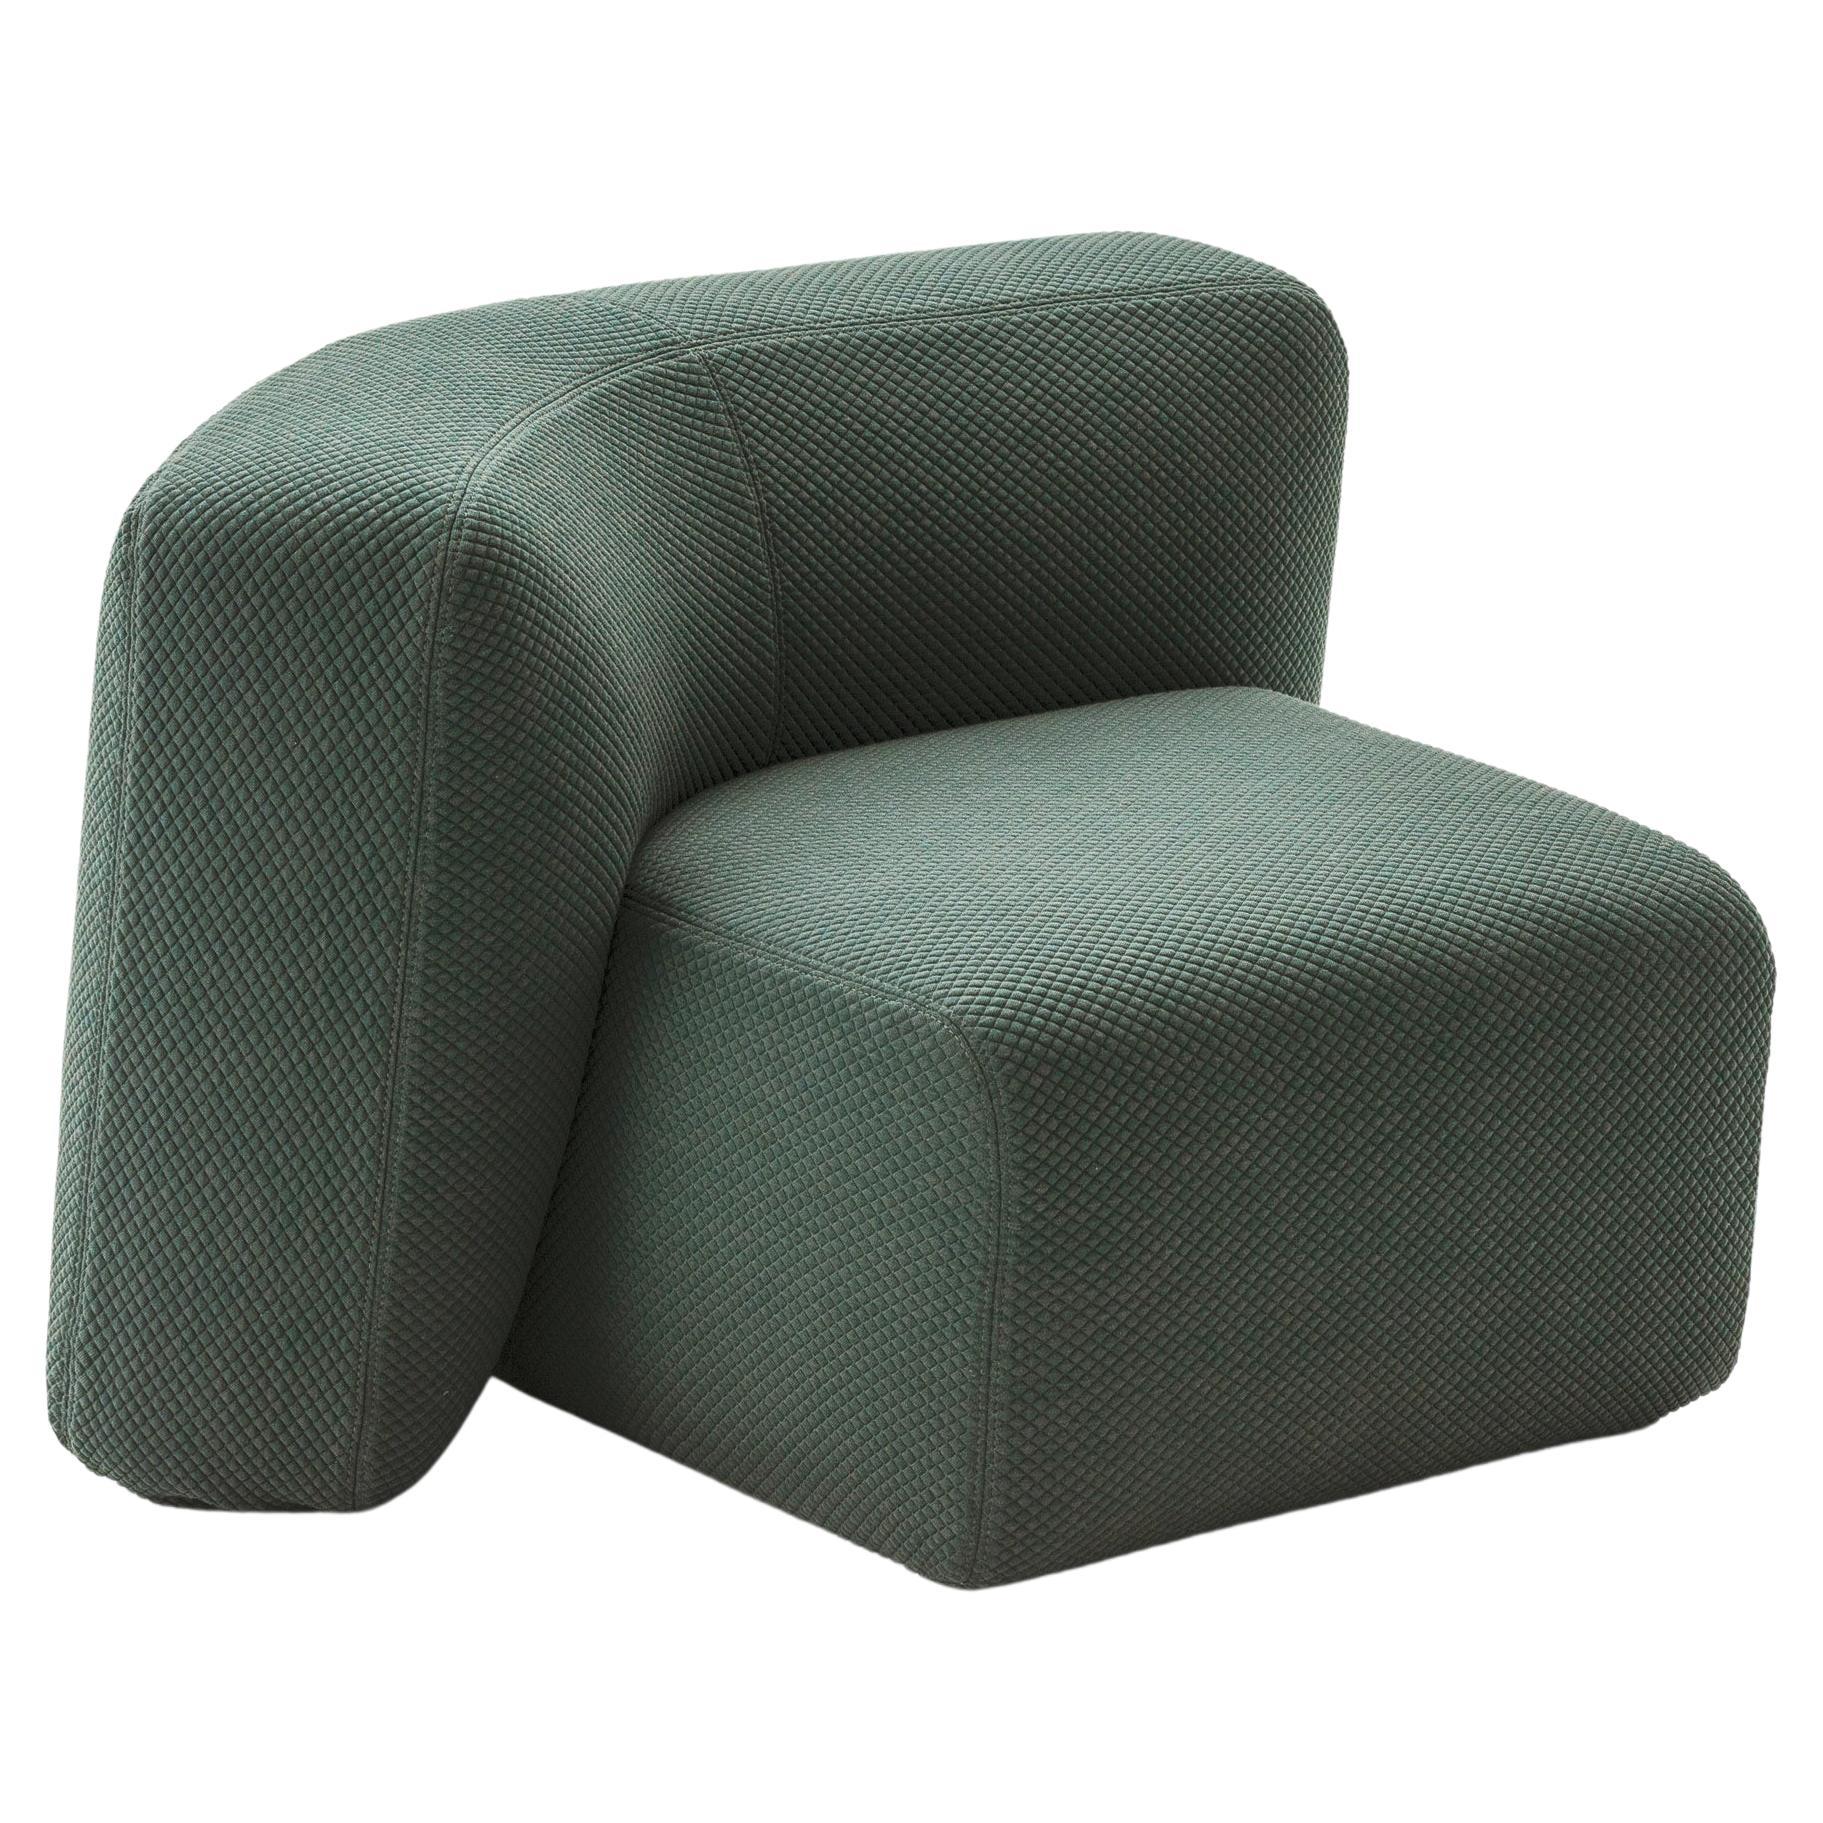 Suiseki Left Armchair in Mosaic 2, 972 Green Upholstery by Andrea Steidl For Sale